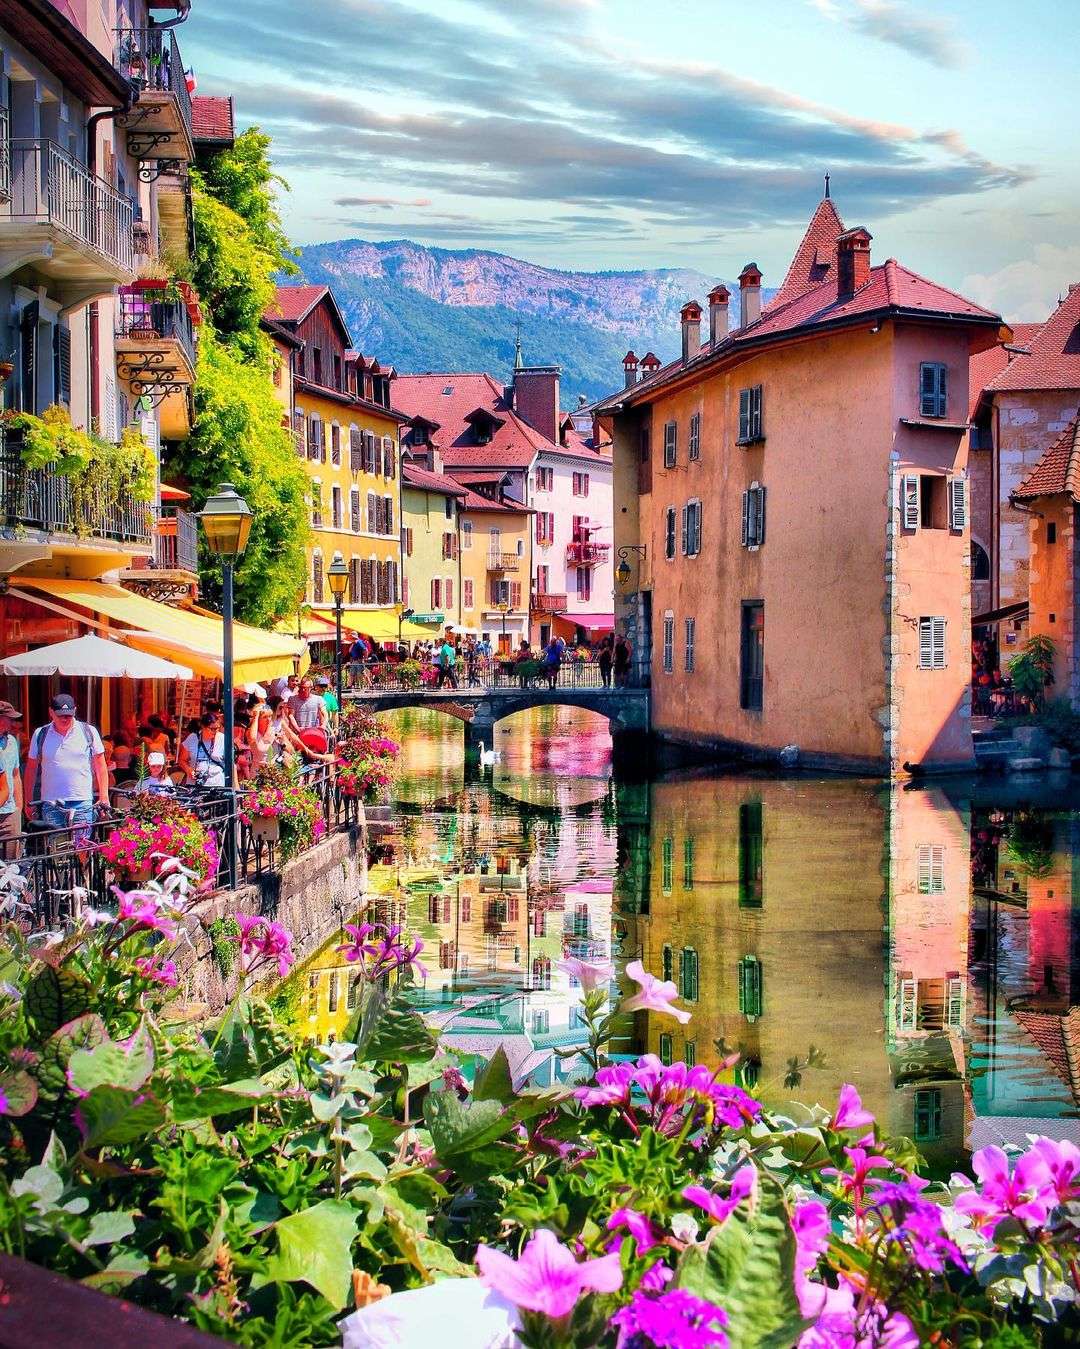 11 Best Things To Do in Annecy - Venice of the French Alps